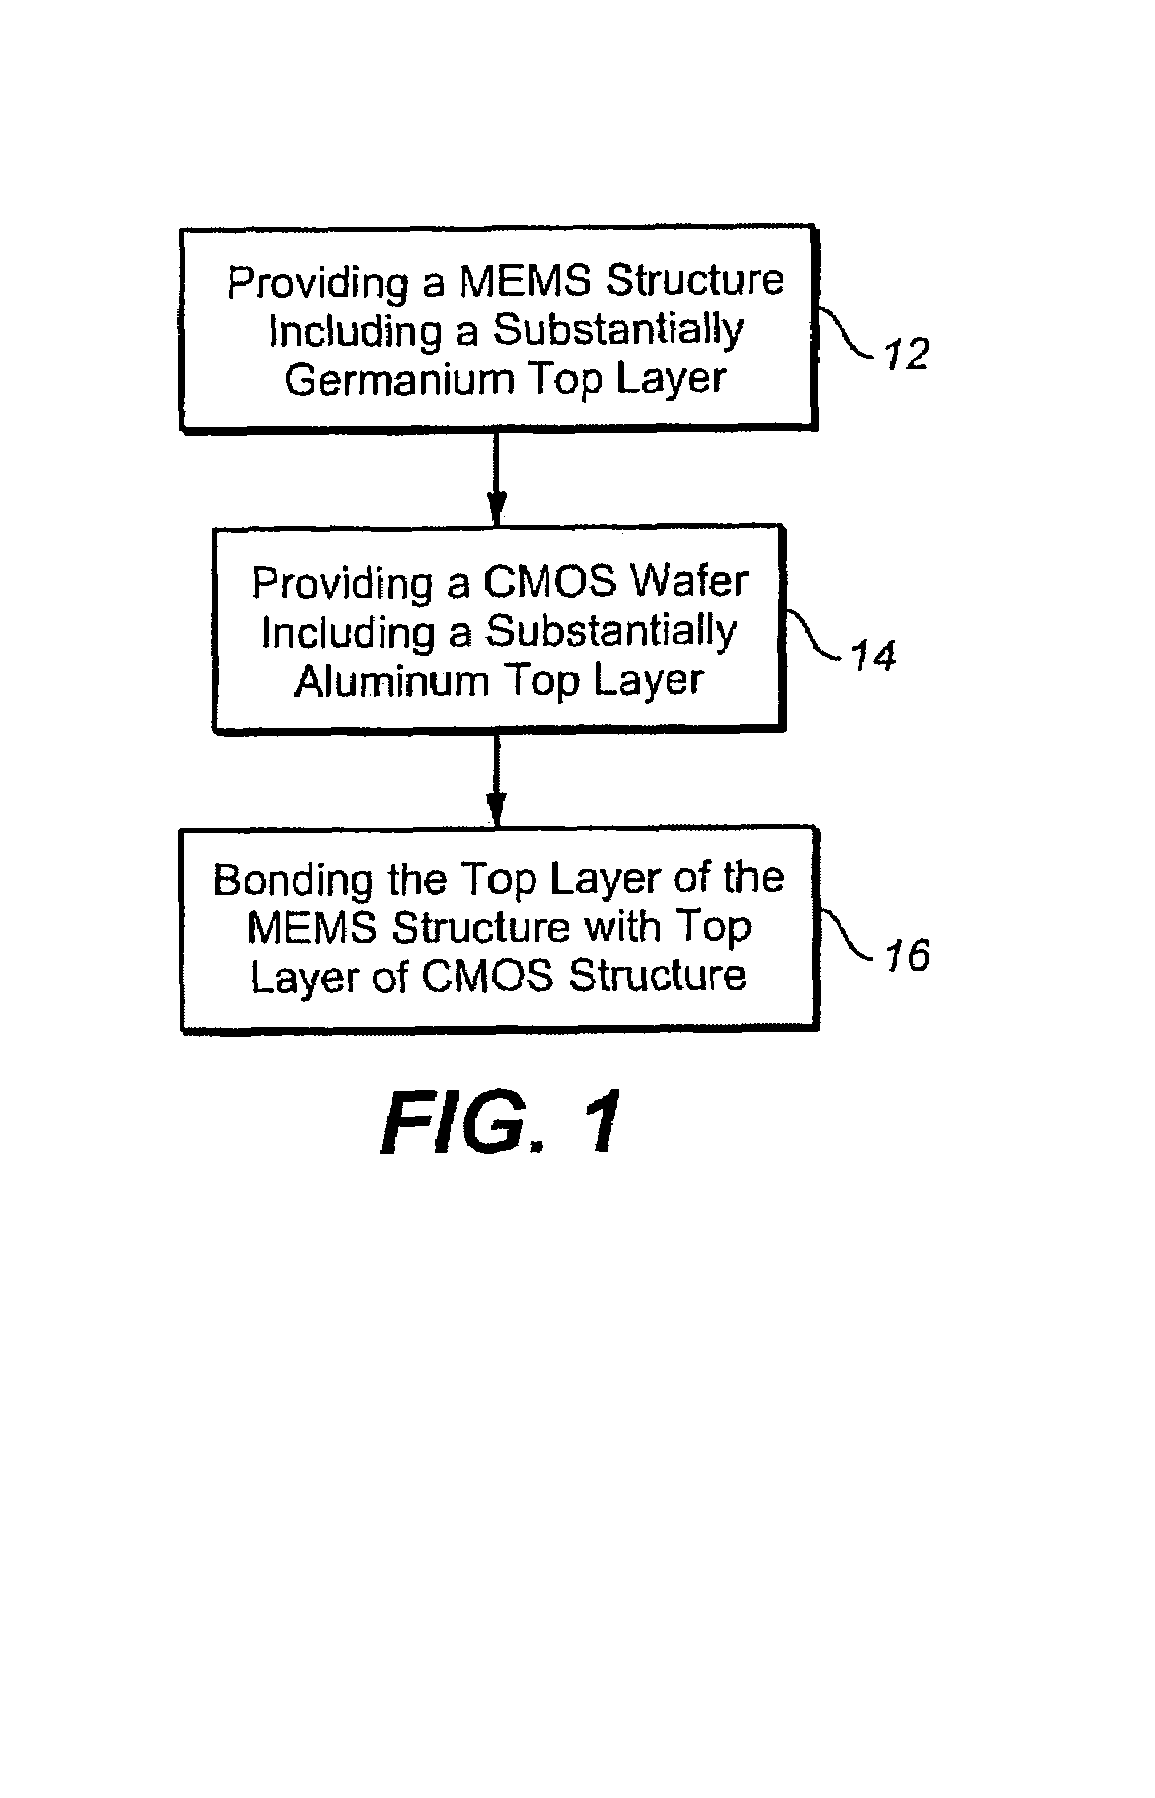 Method of fabrication of a AL/GE bonding in a wafer packaging environment and a product produced therefrom